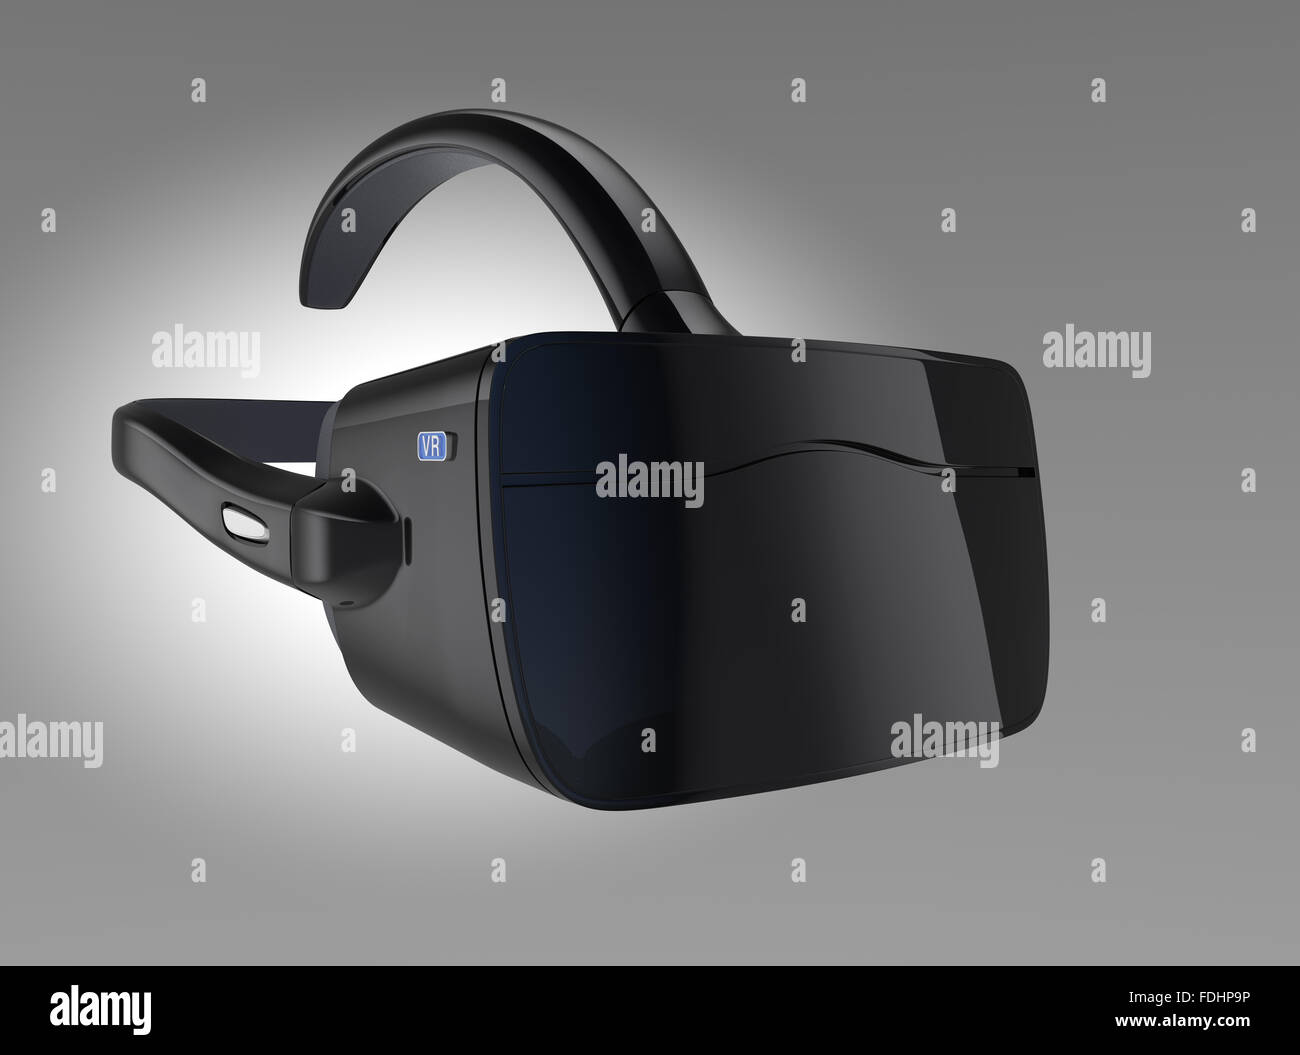 Black VR headset isolated on gray background. Stock Photo